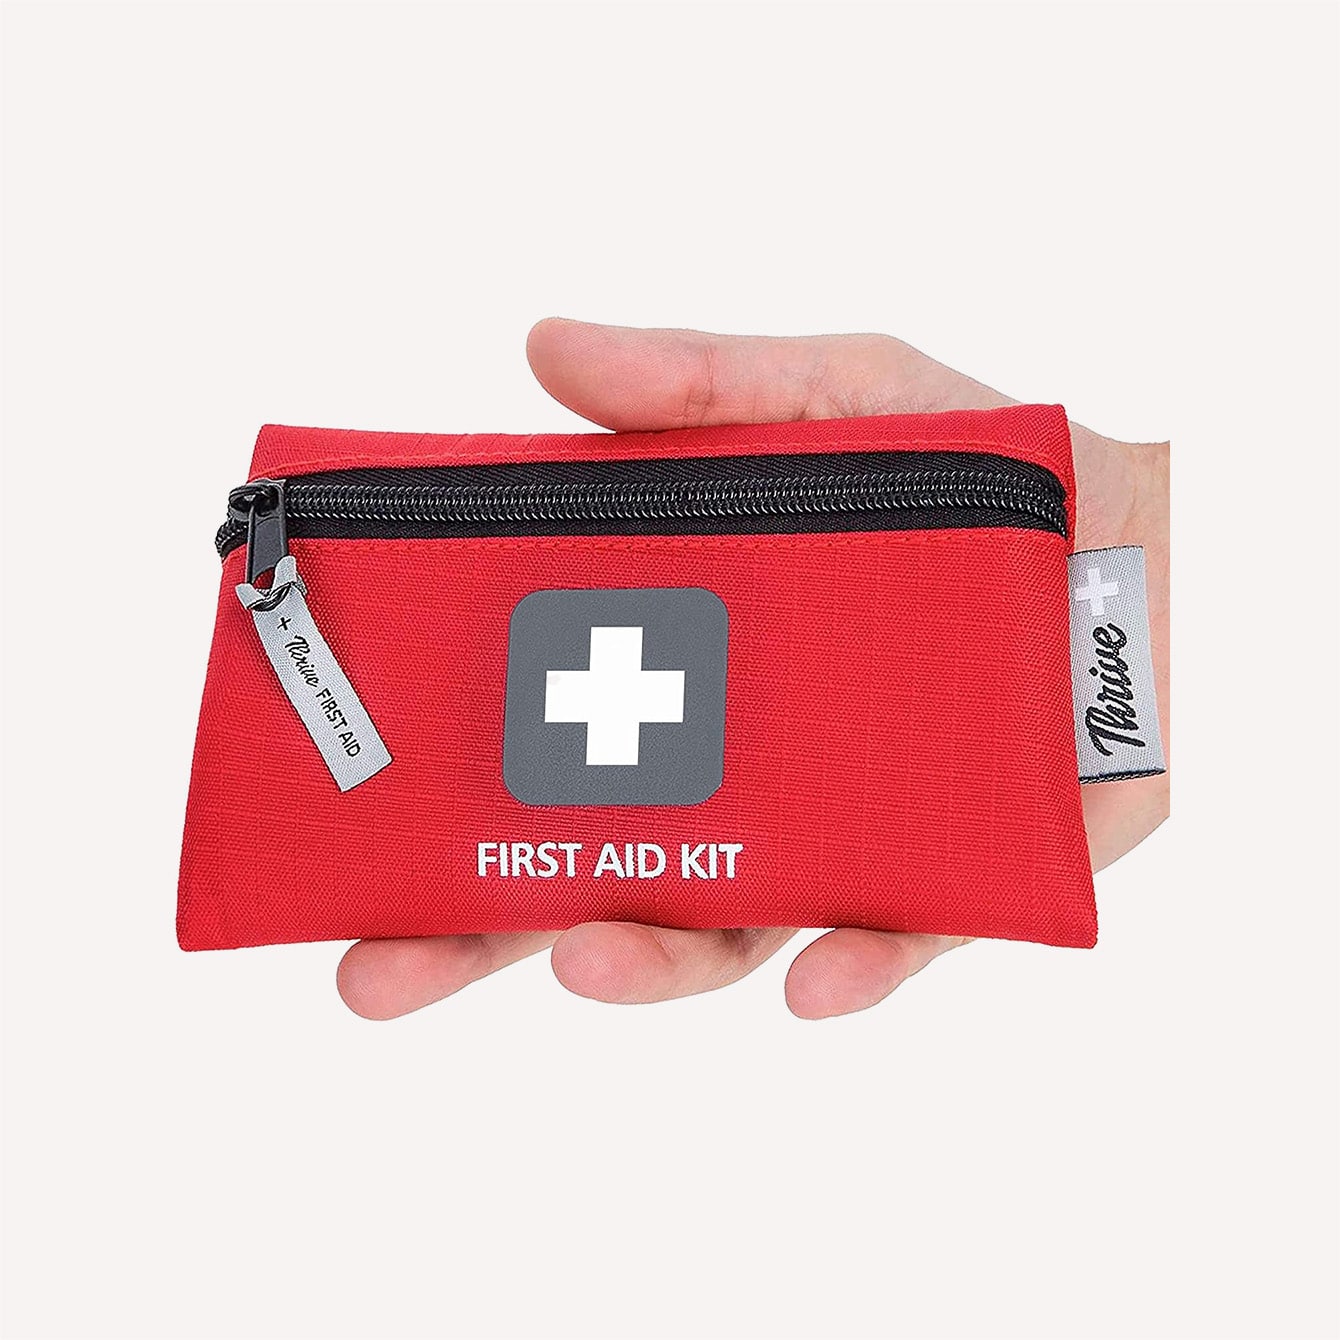 Small First Aid Kit with Medical Supplies